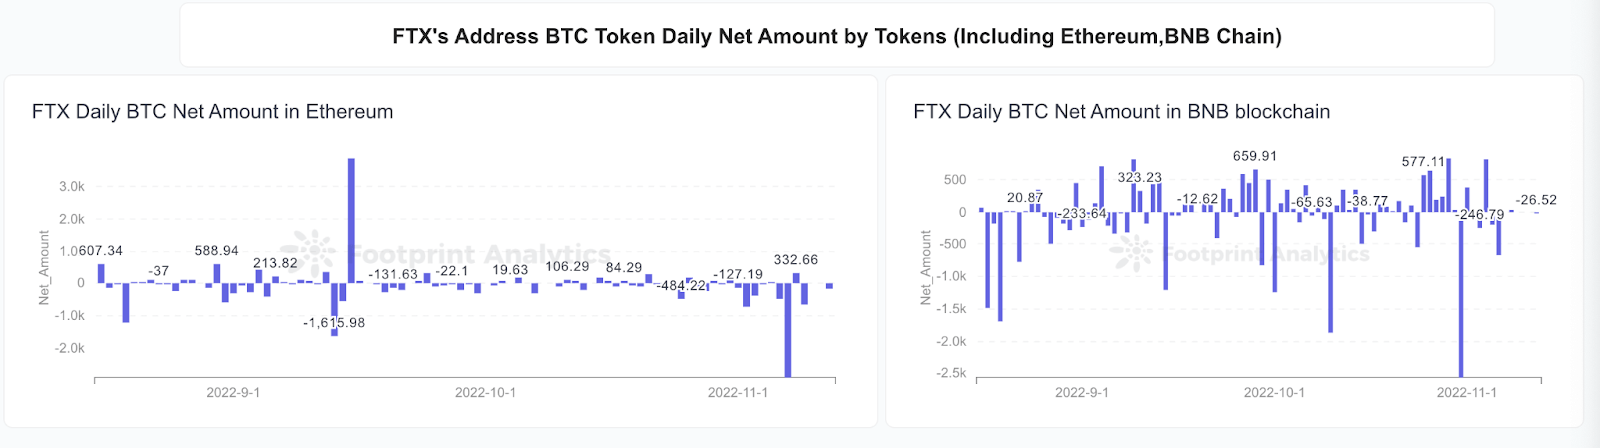 Footprint Analytics - FTX Address Main Tokens Inflow & Outflow